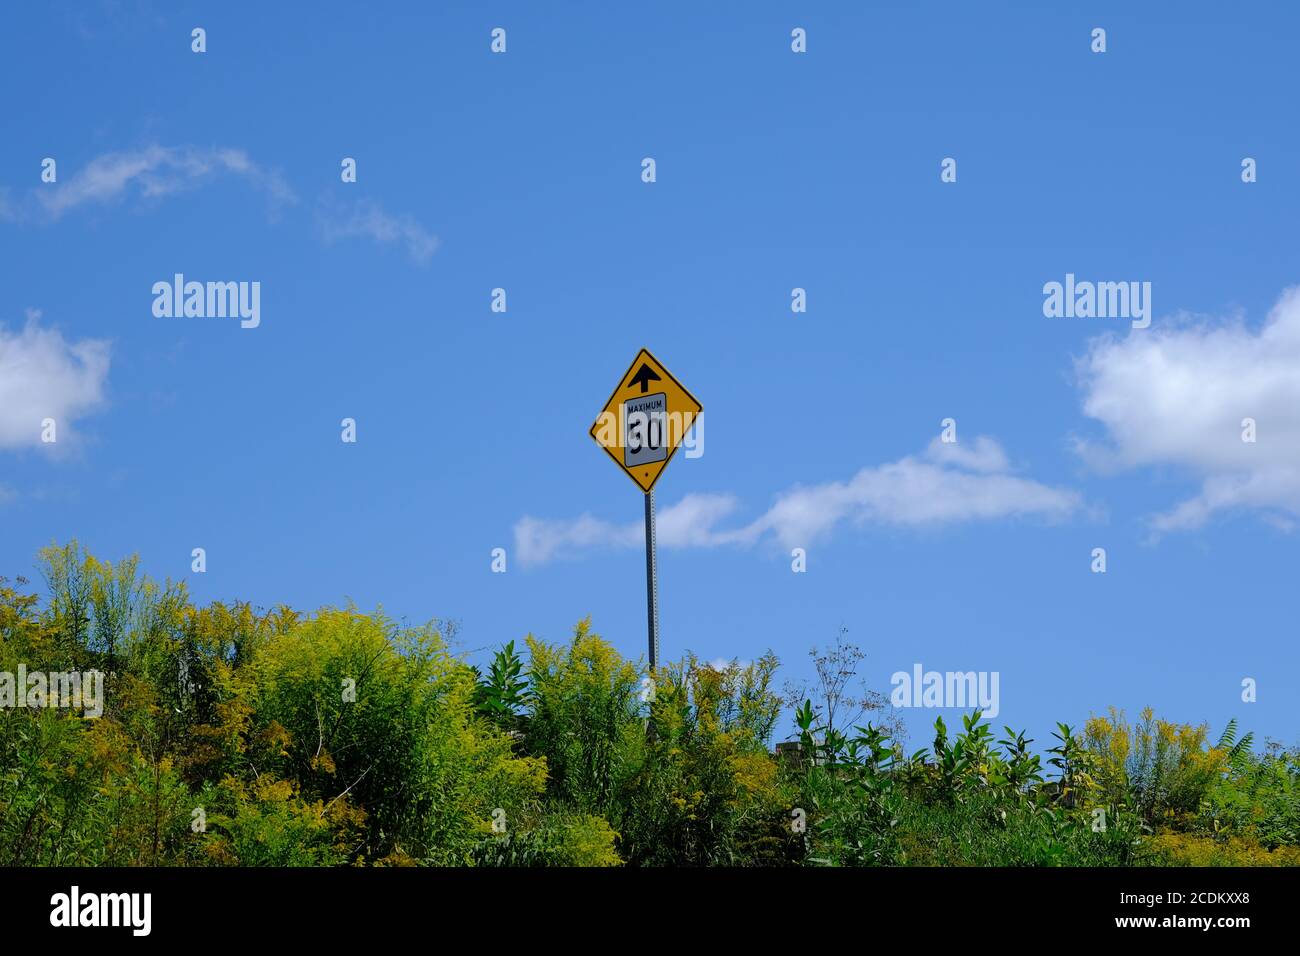 'Maximum 50' km/h yellow diamond road sign against a blue sky on an overgrown Quebec road side, Canada. Stock Photo